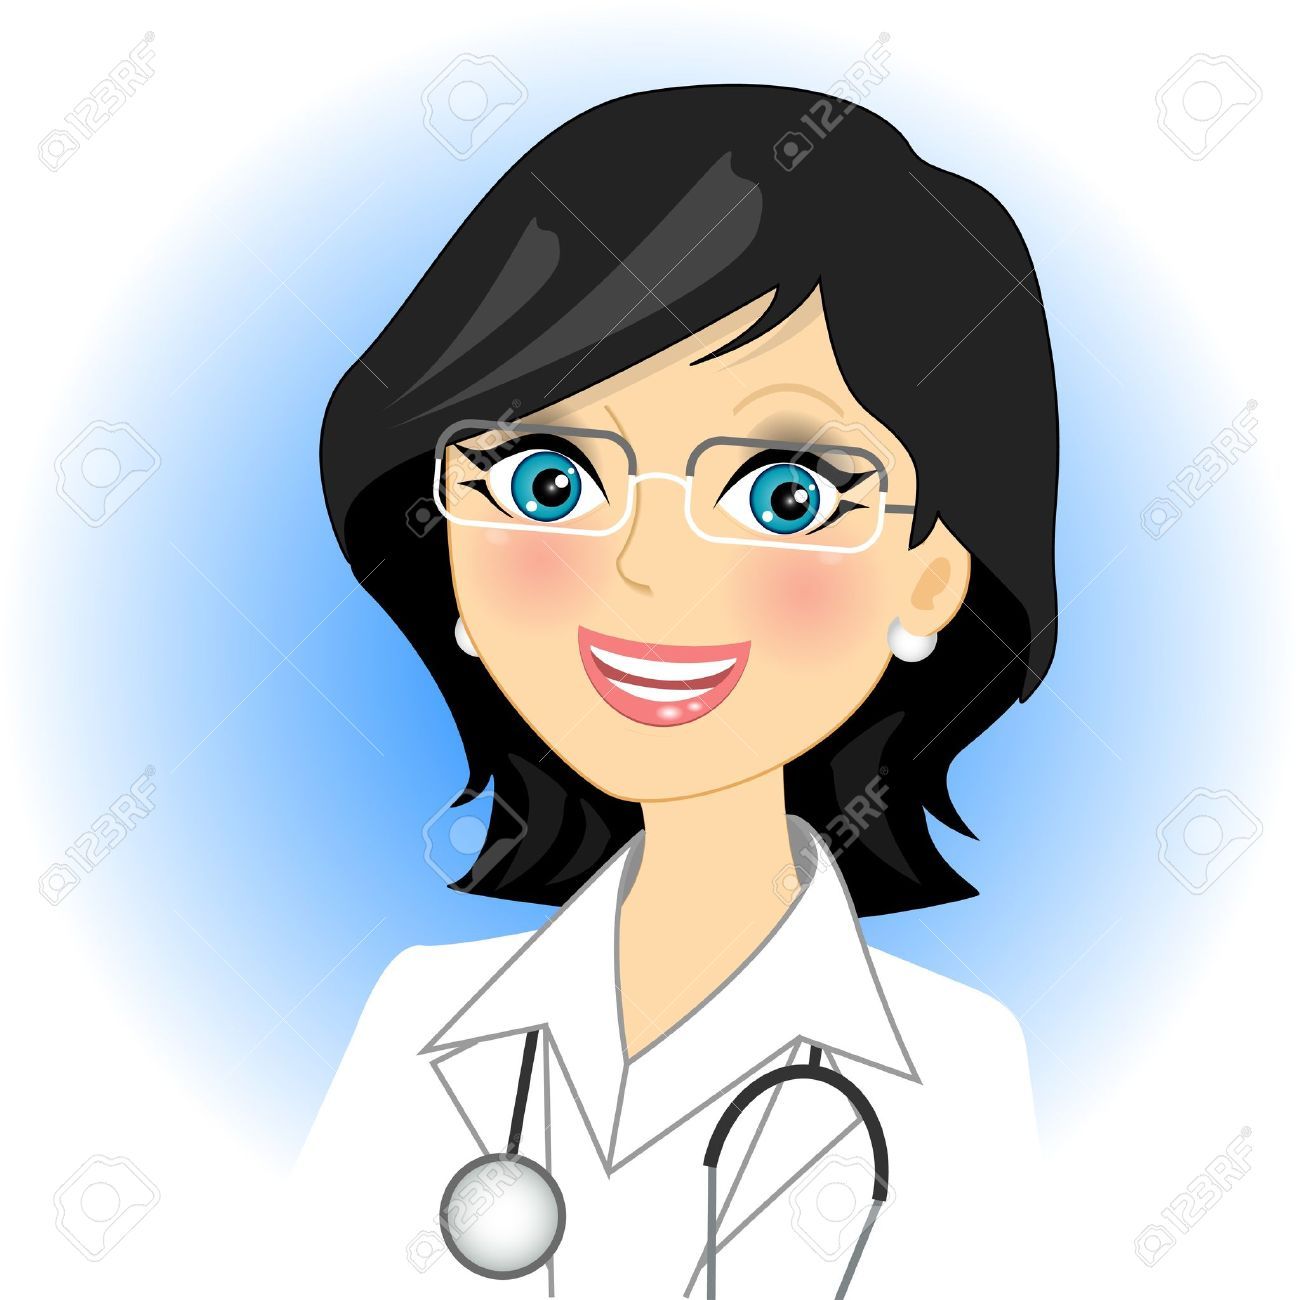 Doctor And Patient Cliparts, Stock Vector And Royalty Free